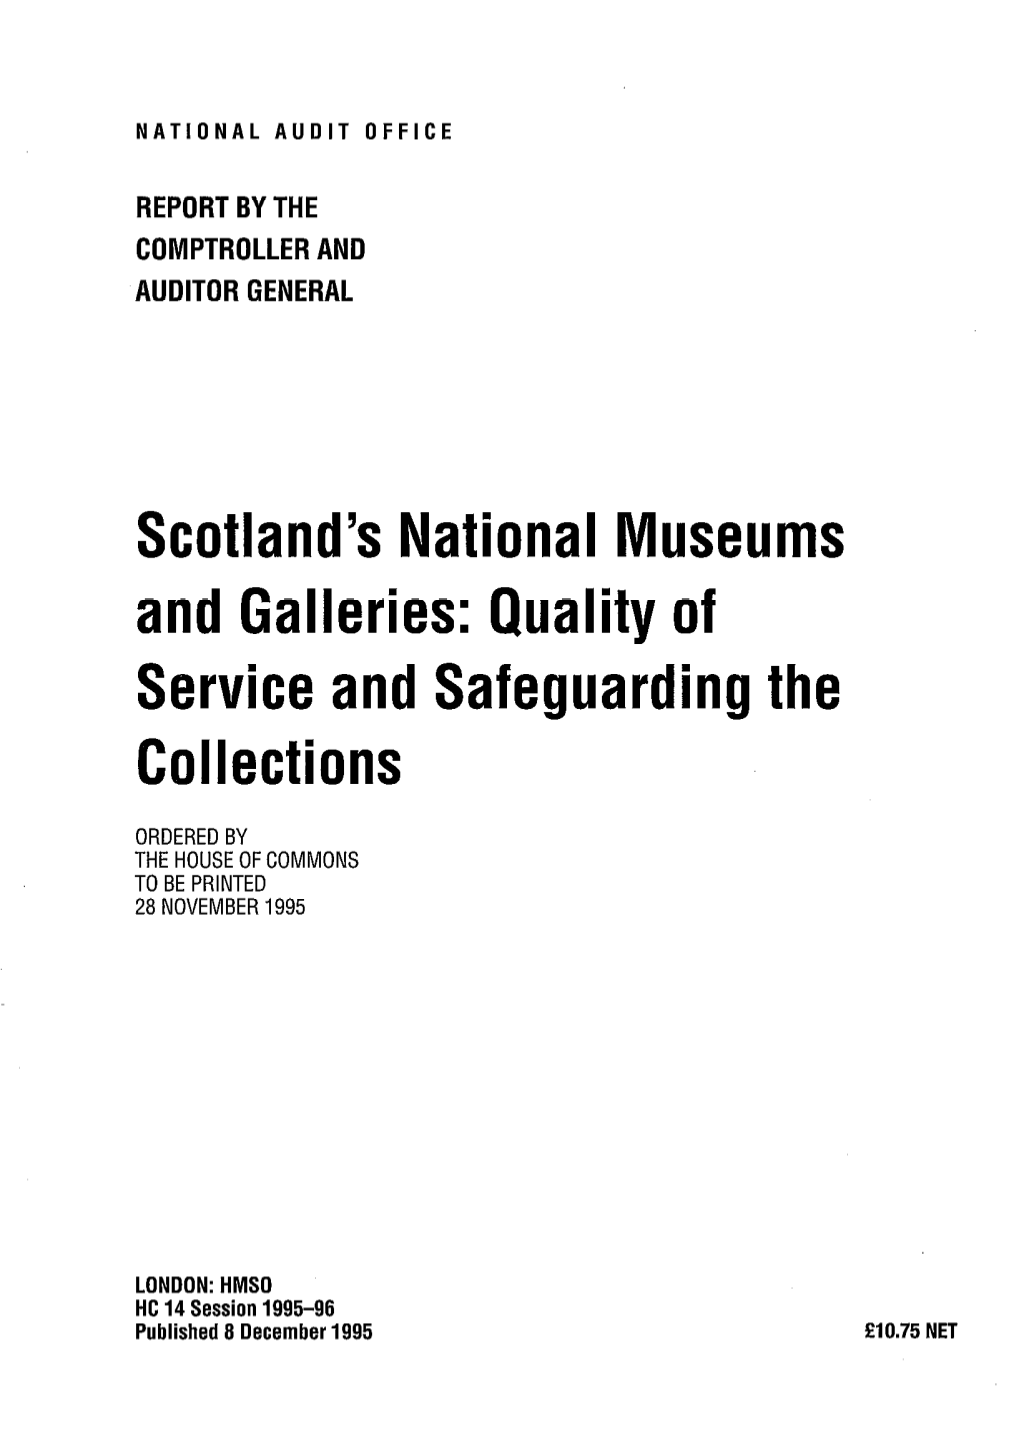 Scotland's National Museums and Galleries: Quality of Service And